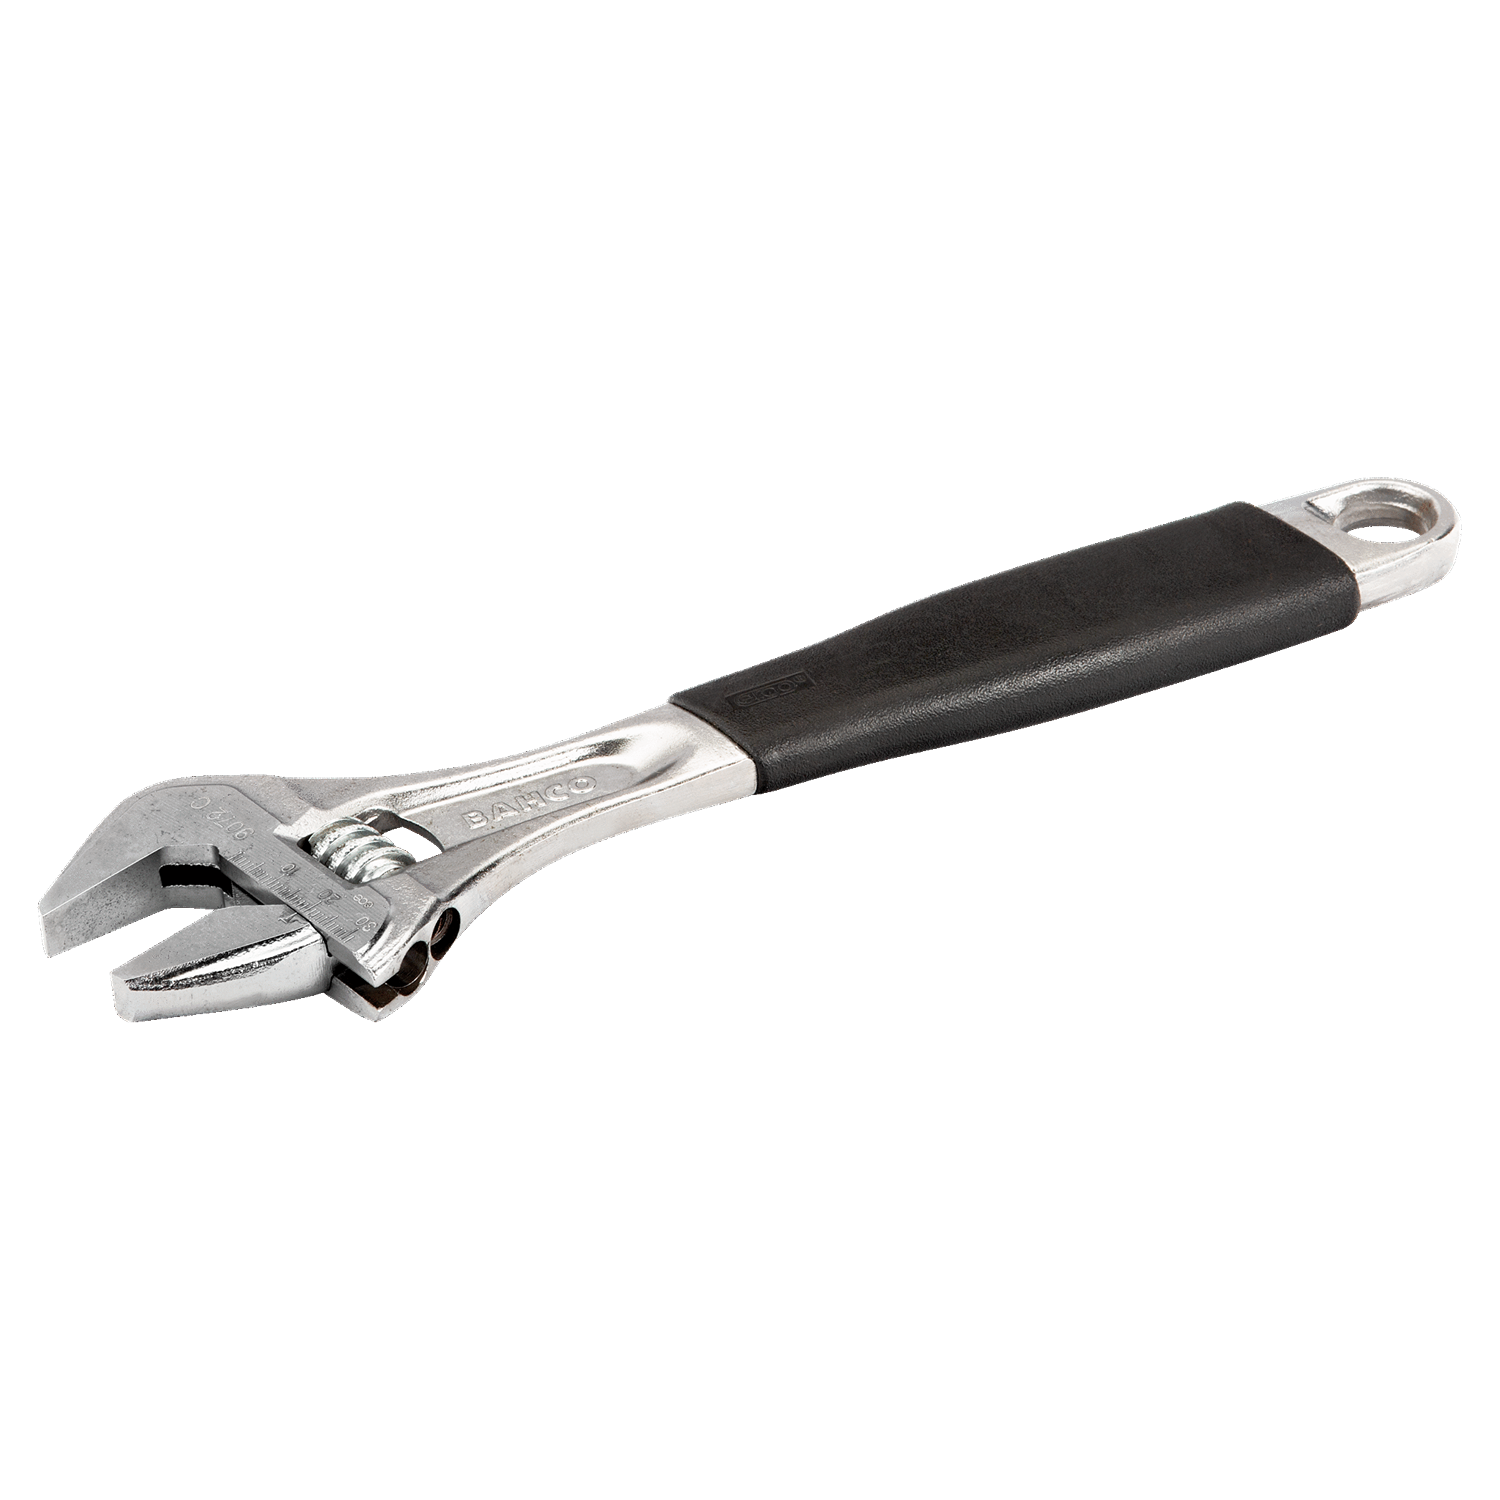 BAHCO 90C ERGO Central Nut Adjustable Wrench with Chrome Finish - Premium Adjustable Wrench from BAHCO - Shop now at Yew Aik.